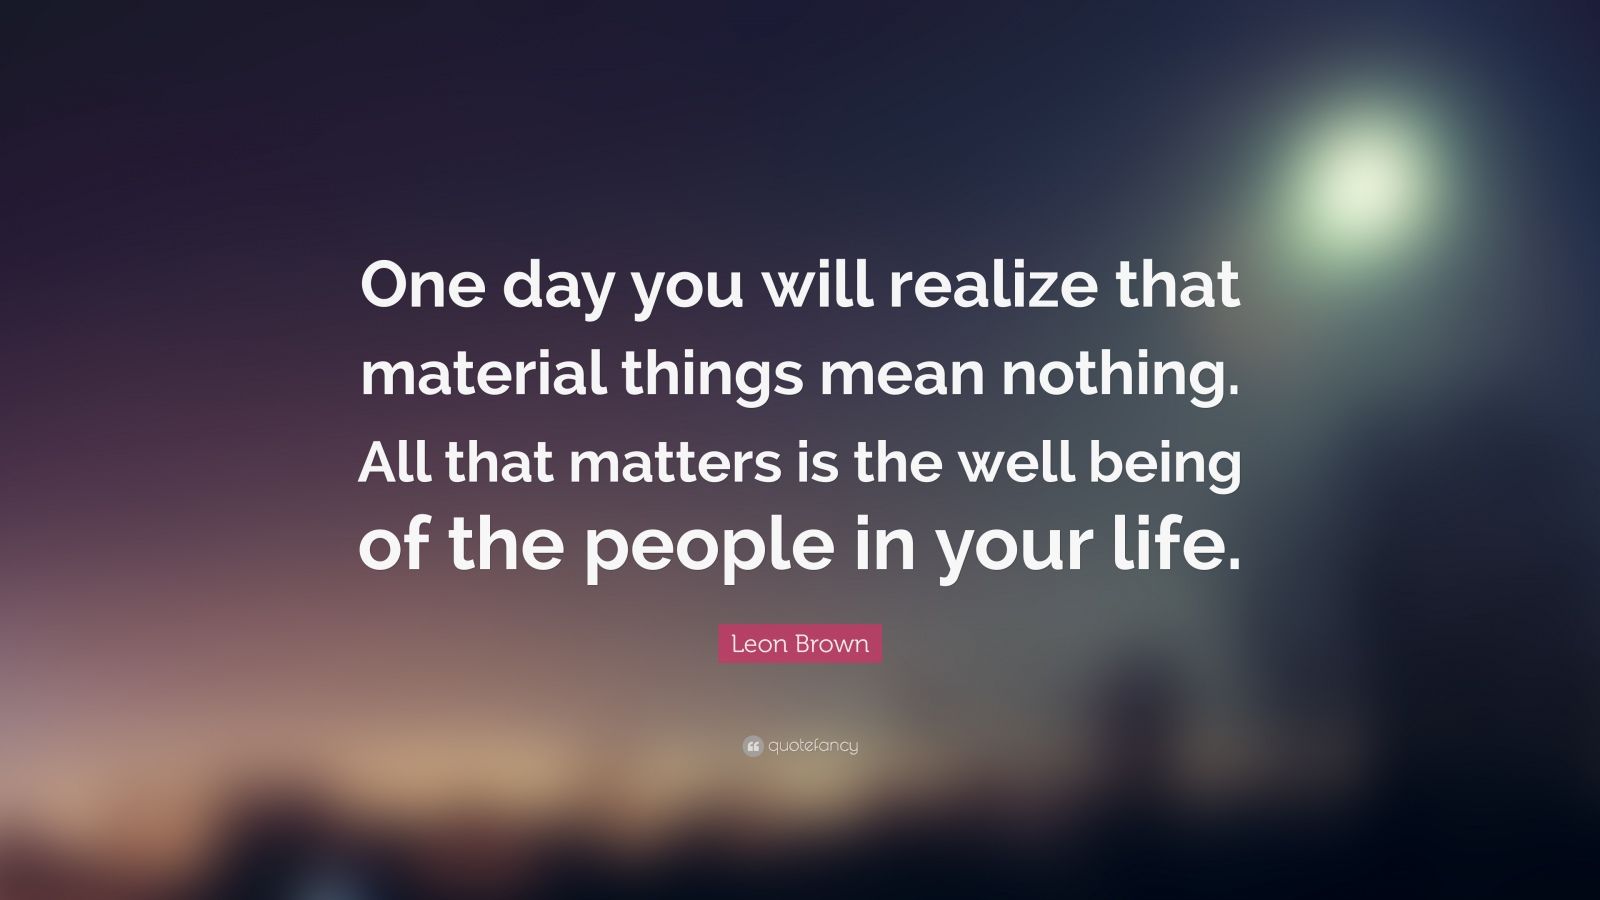 Leon Brown Quote: “One day you will realize that material things mean